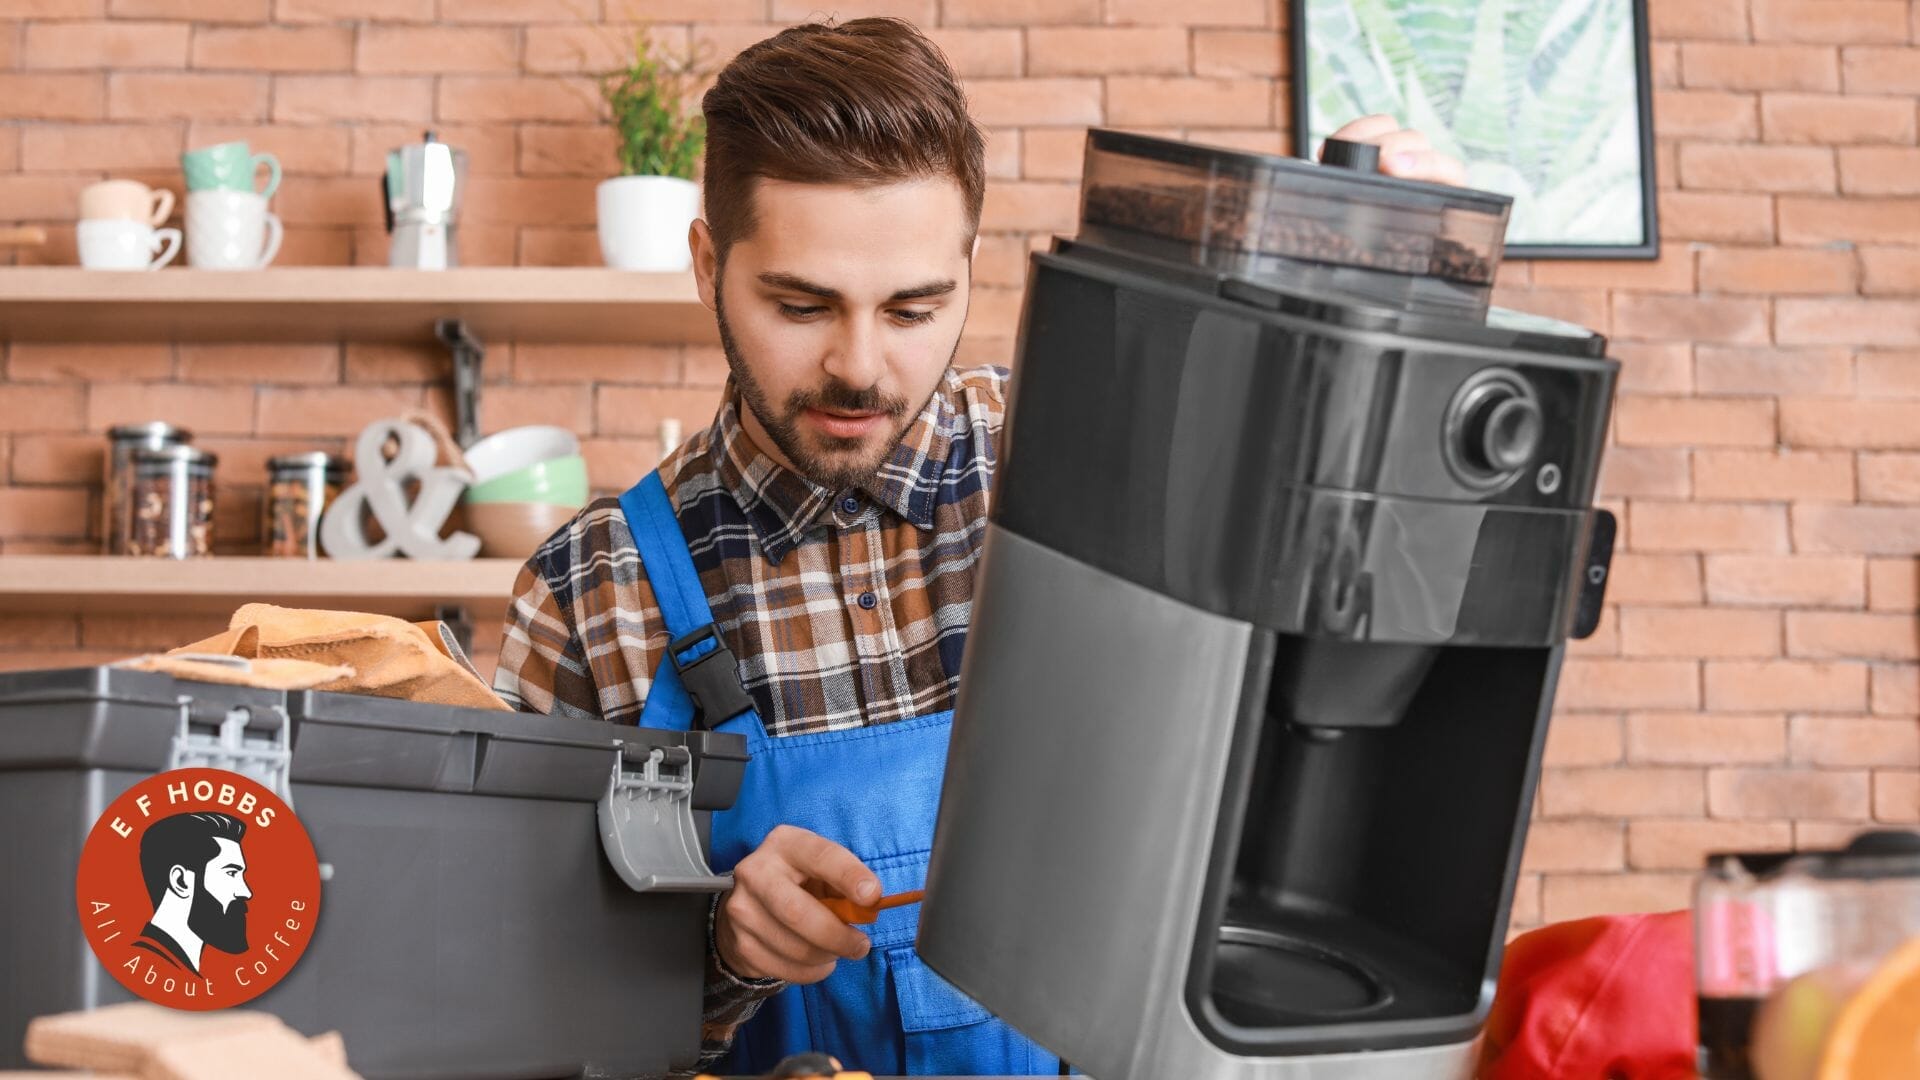 How To Dispose Of Broken Coffee Maker